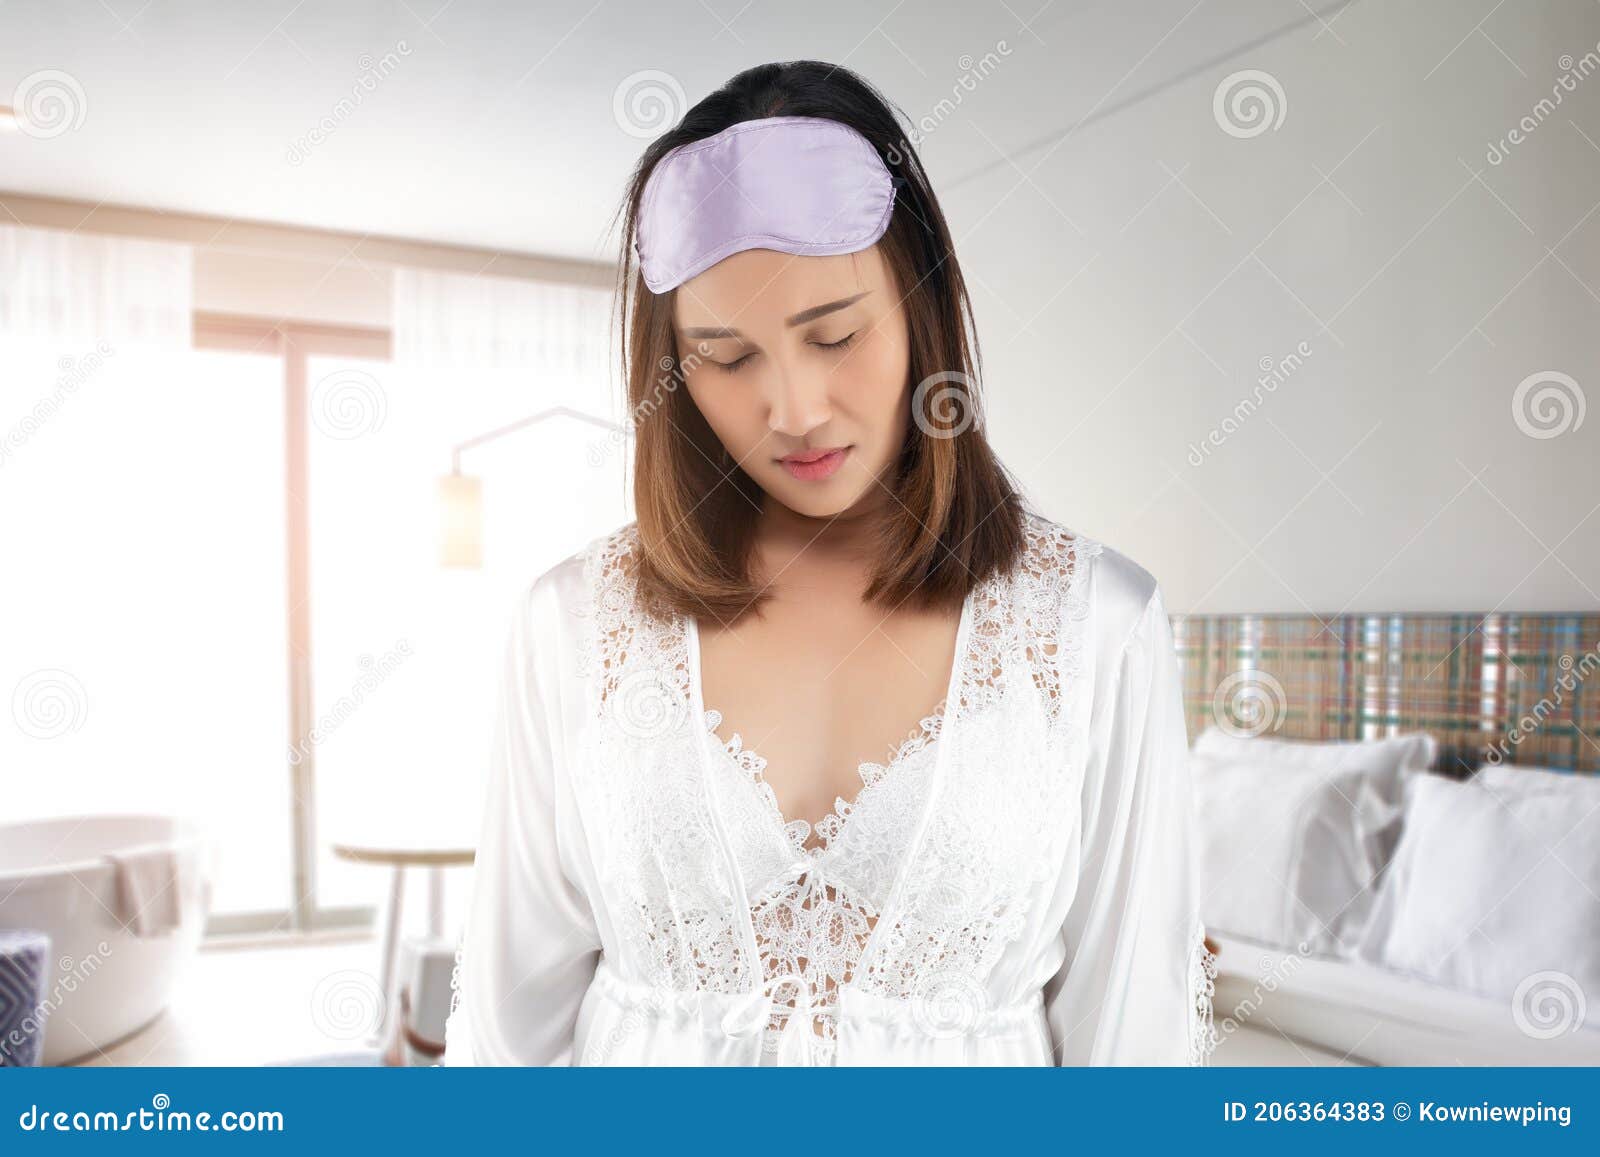 laziness woman asleep standing in the morning